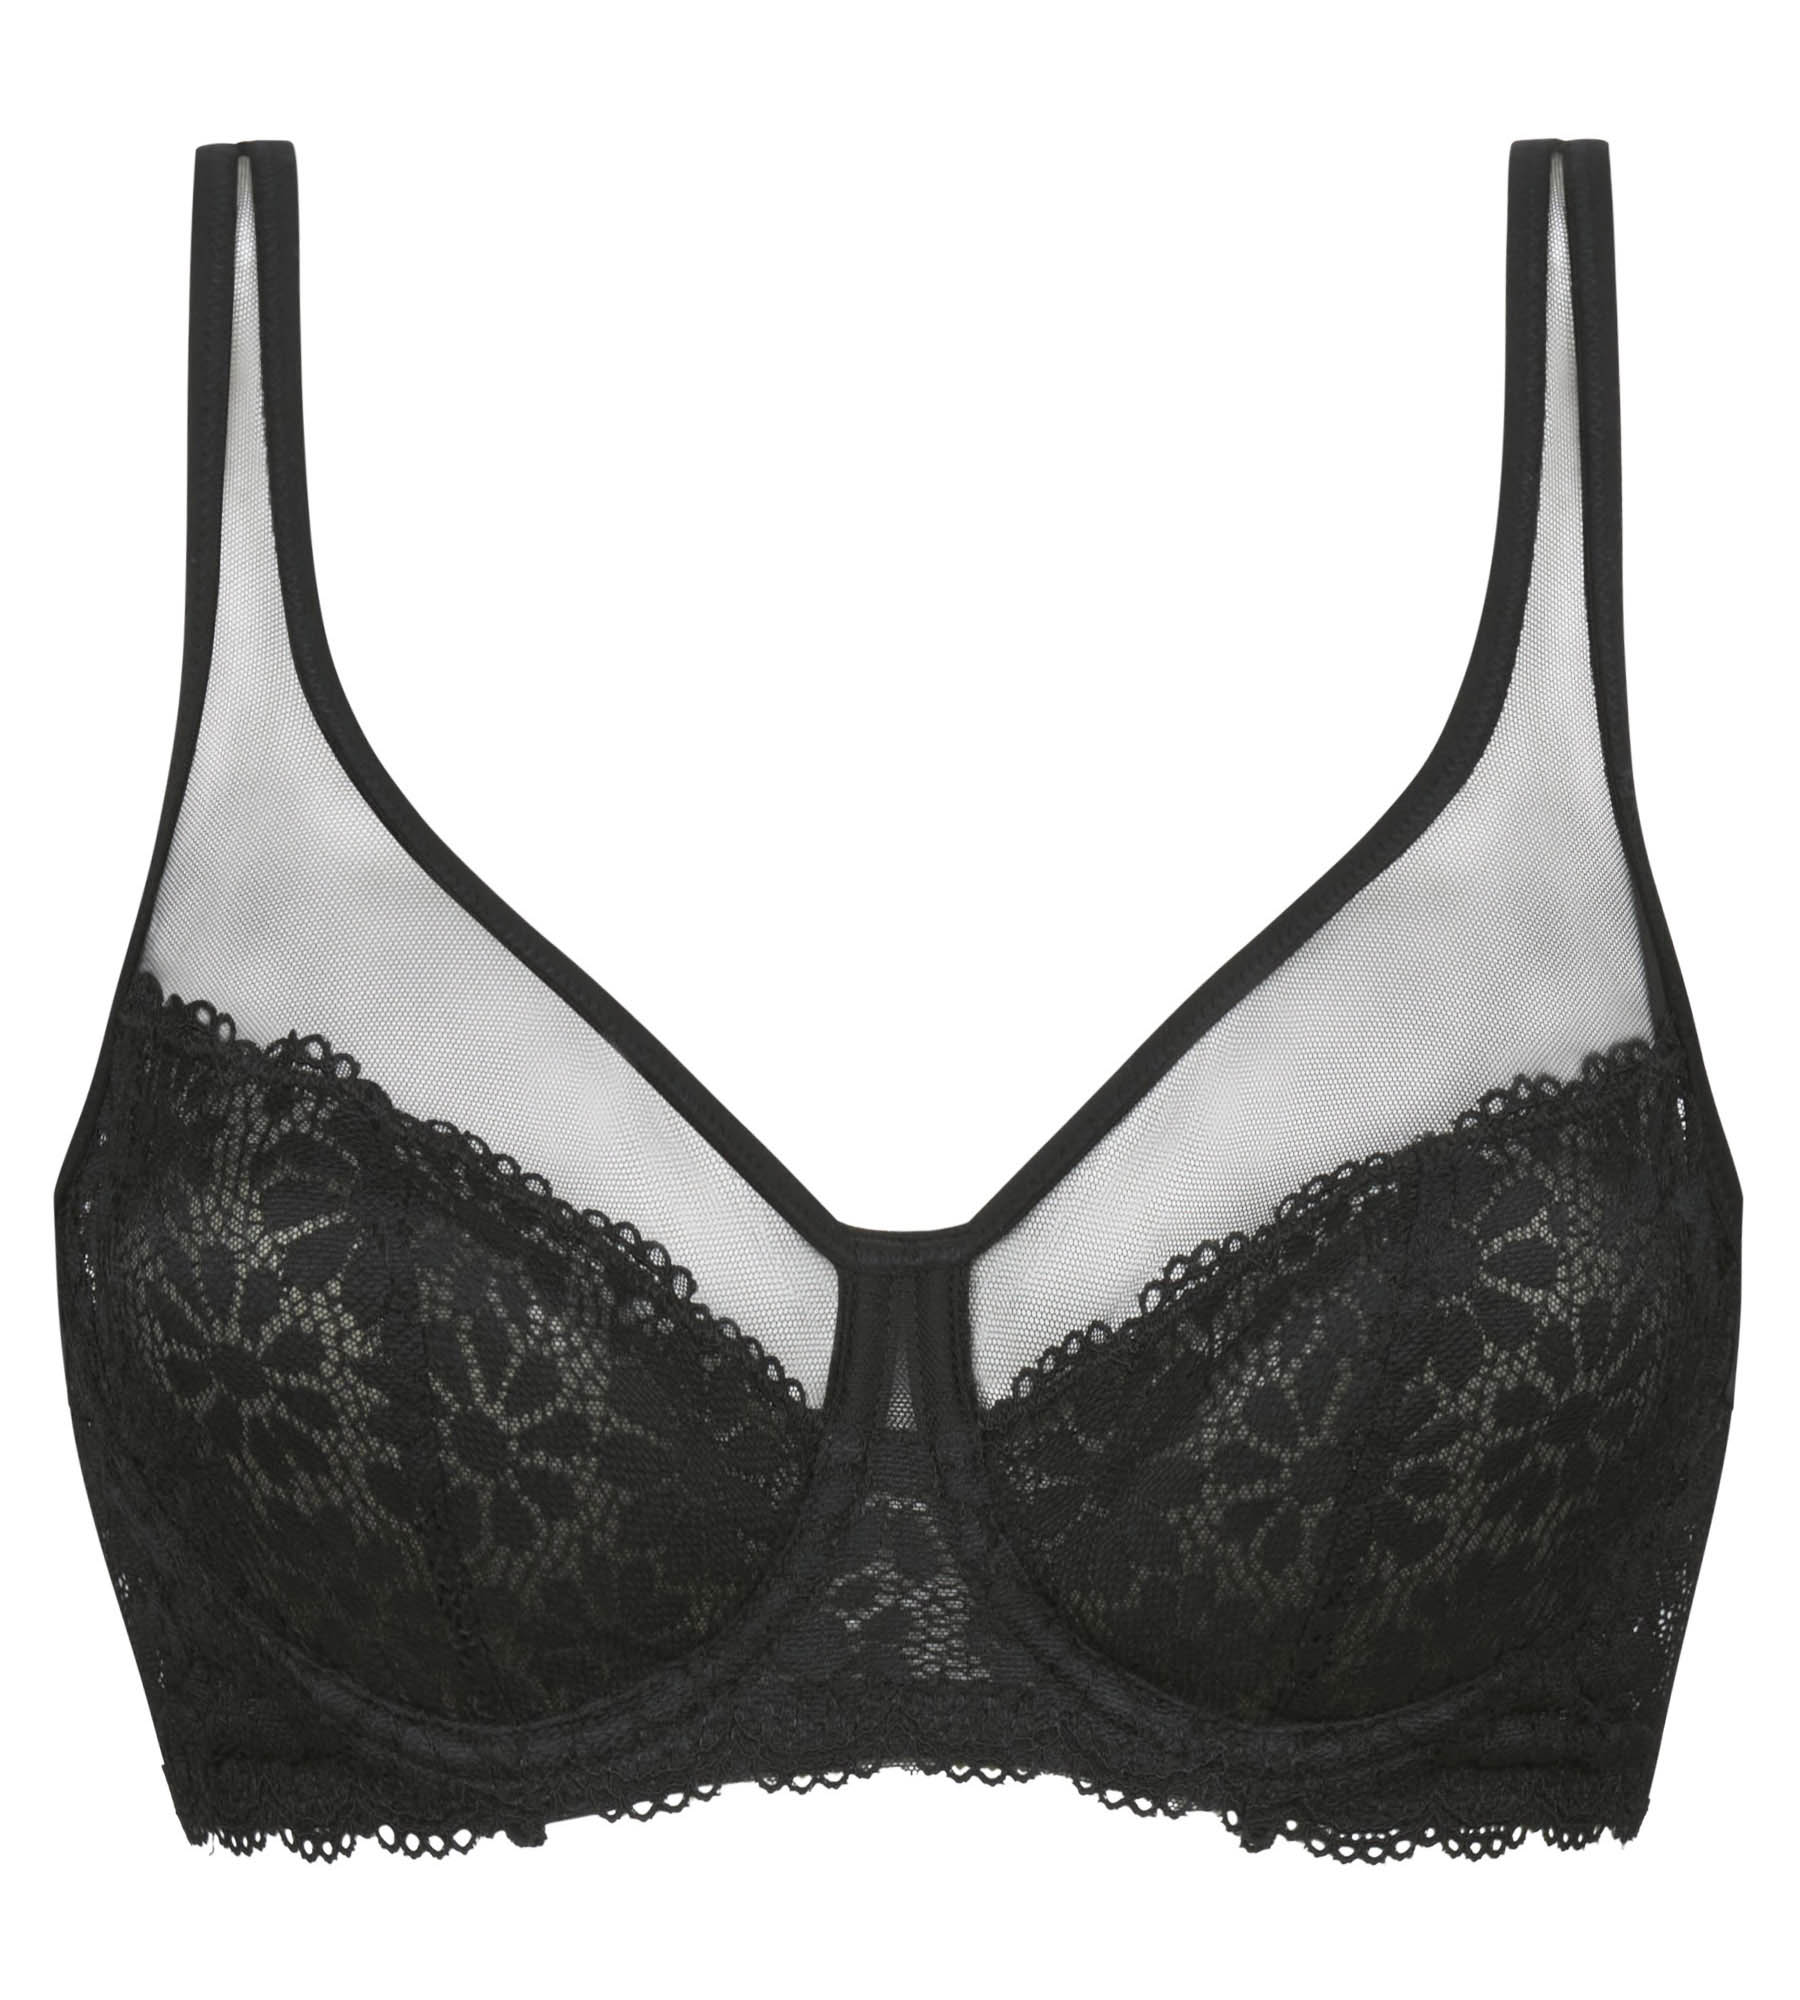 Buy DD-GG Black Recycled Lace Comfort Full Cup Bra 42F, Bras